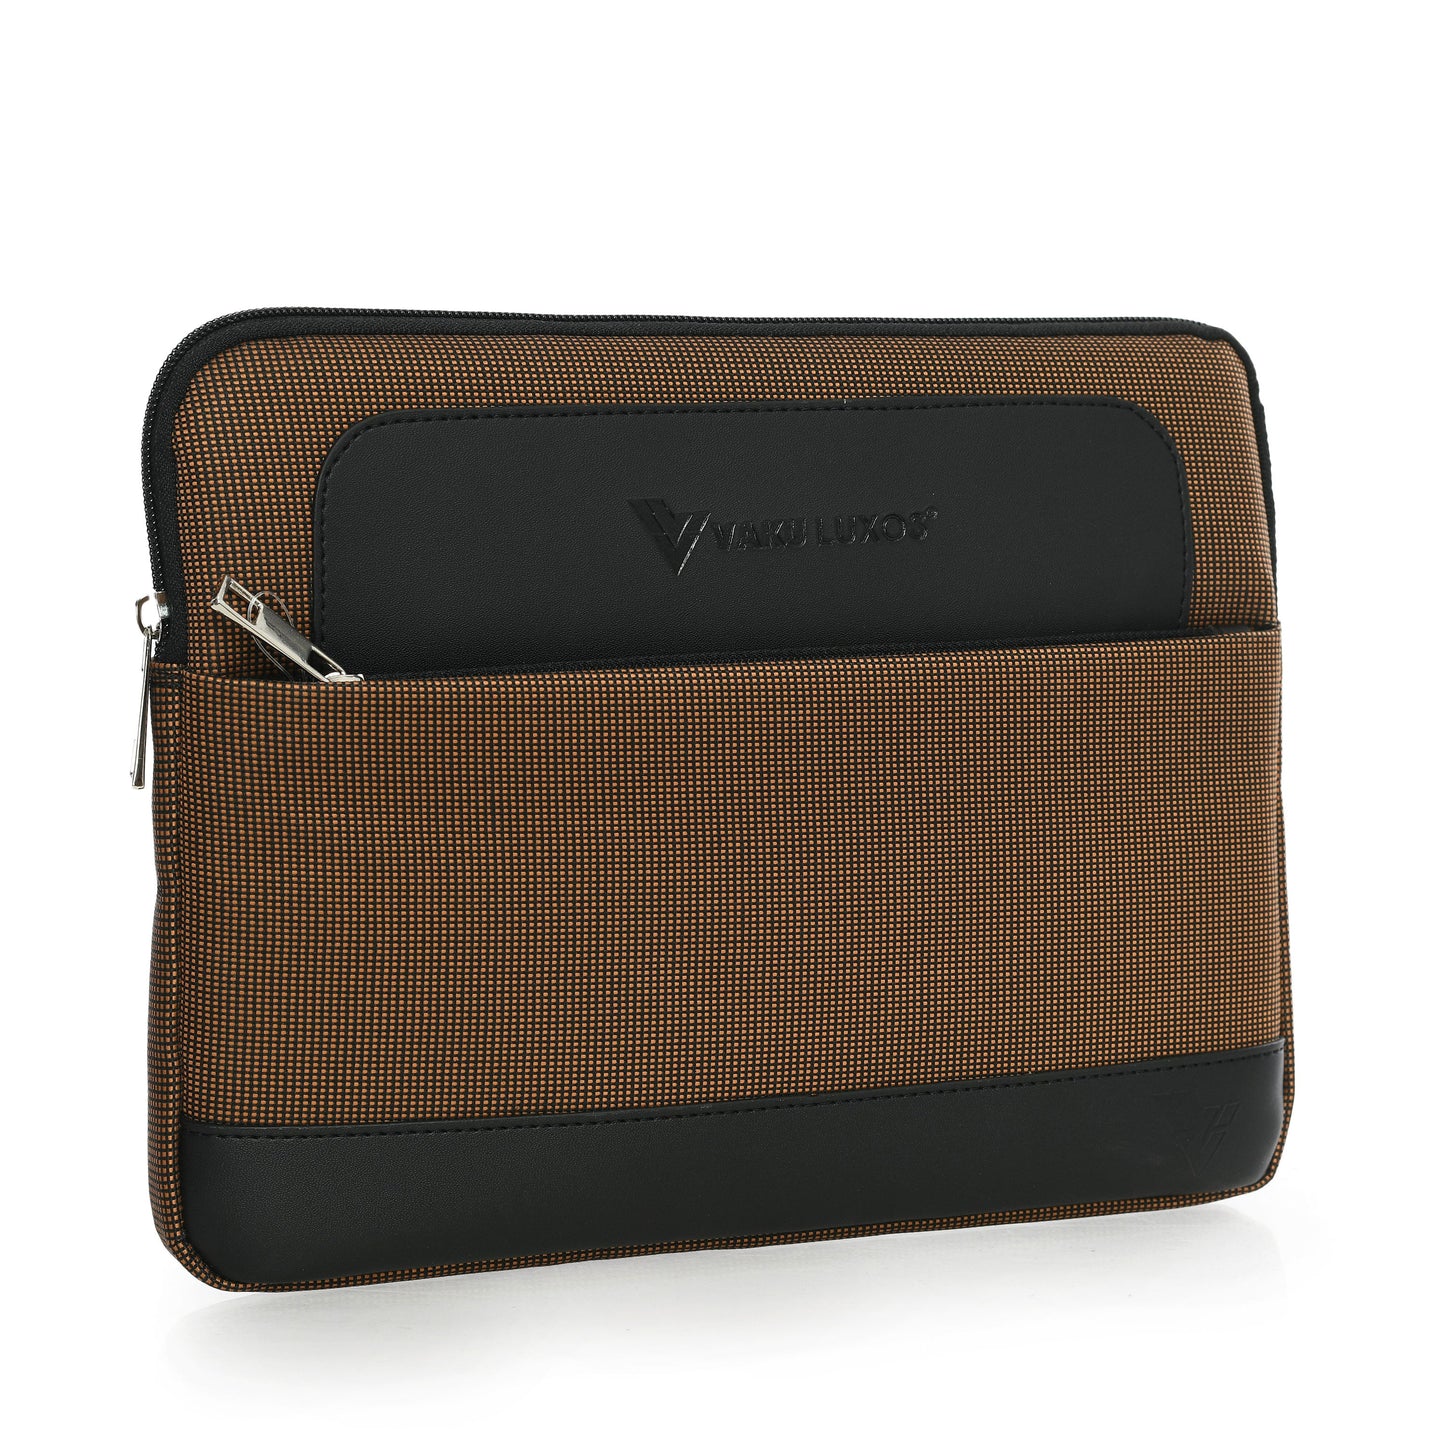 vaku-luxos®-salero-mini-pouch-for-ipad-air-pro-compatible-with-10-2-to-11-black-brown8905129019303